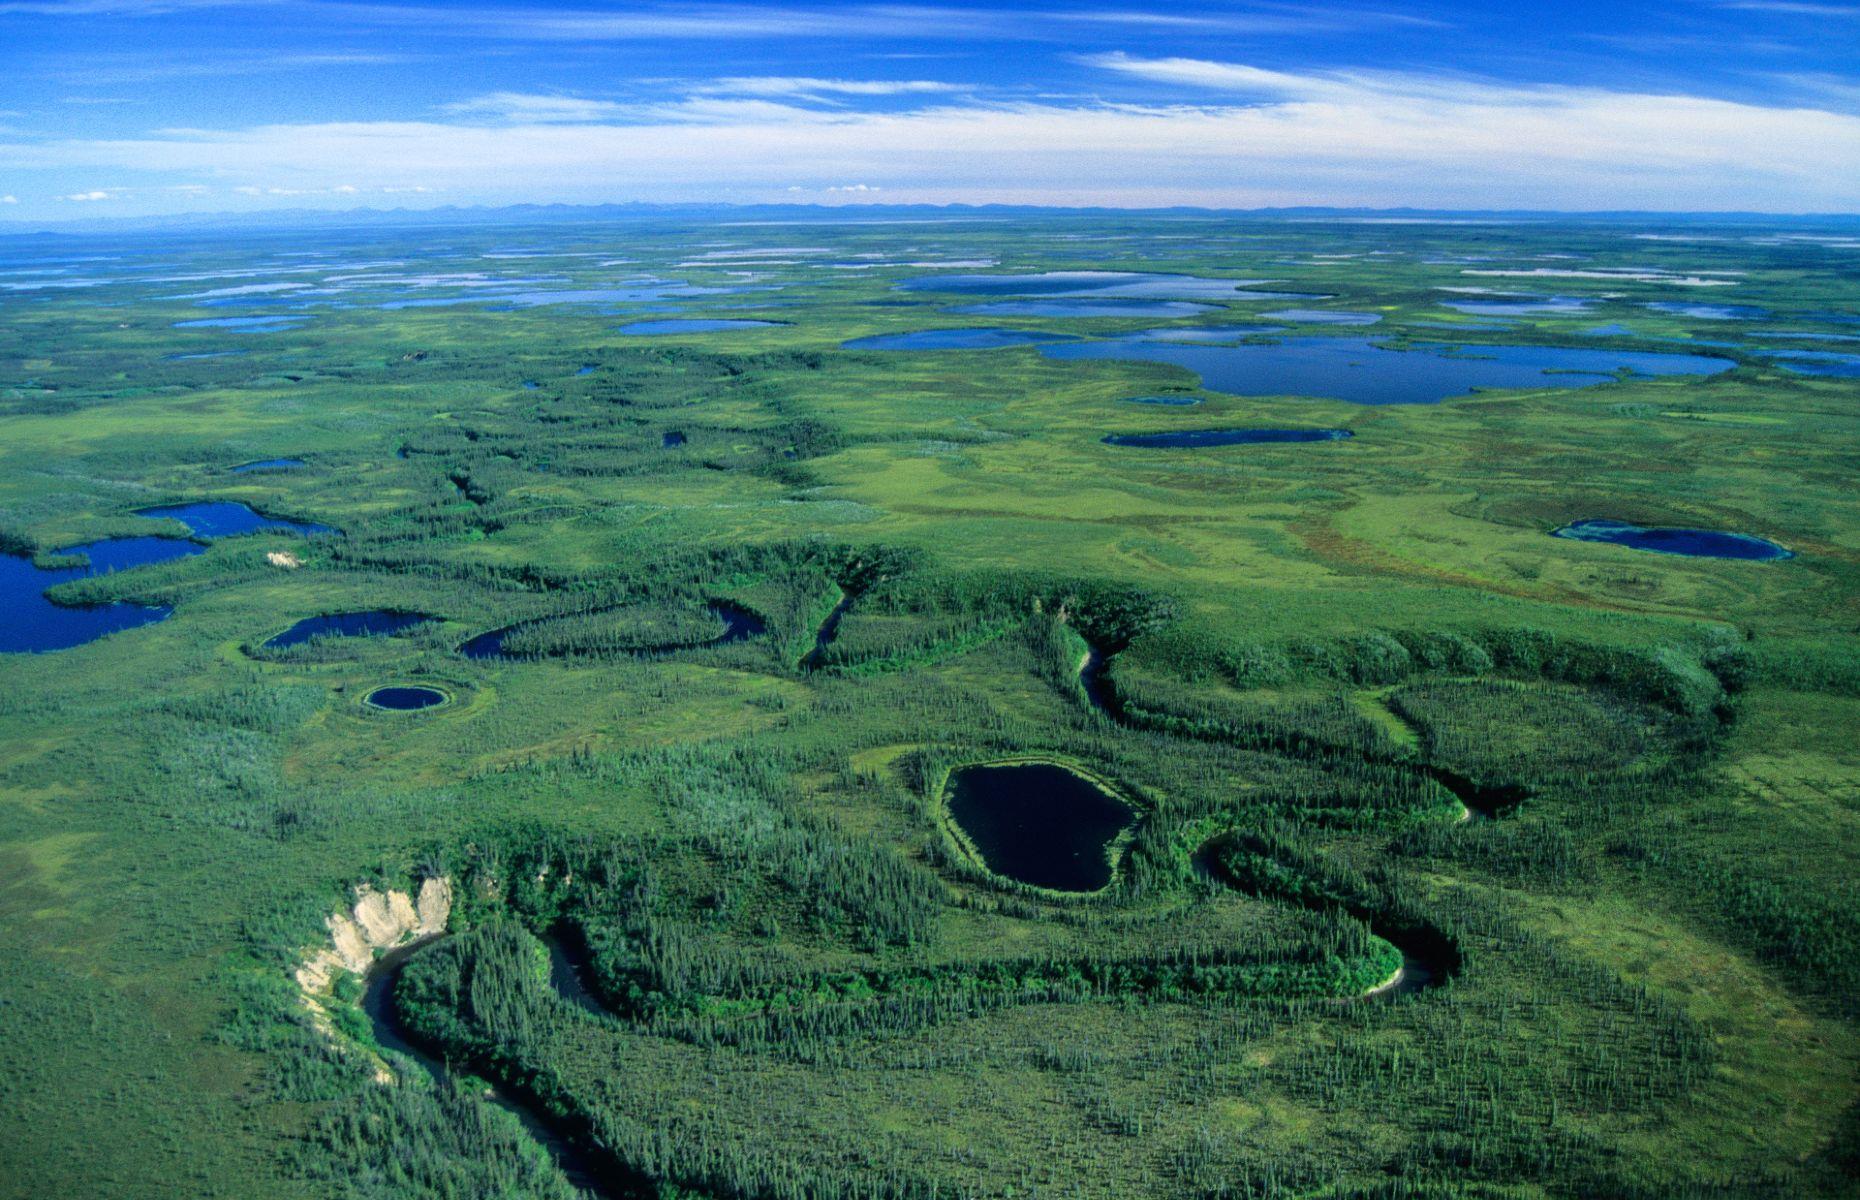 <p>Also known by its anglicized name 'Old Crow Flats', this wetland complex along the Old Crow River is inside the Arctic Circle and surrounded by mountains on all sides. But that didn’t stop the Vuntut Gwitchin people settling here more than 10,000 years ago. The Indigenous tribe, known as 'the people of the lakes', survived in the harsh north by hunting, and their arrival may have contributed to the local extinction of ground sloths, giant beavers and mammoths, all of which survive only in fossils.</p>